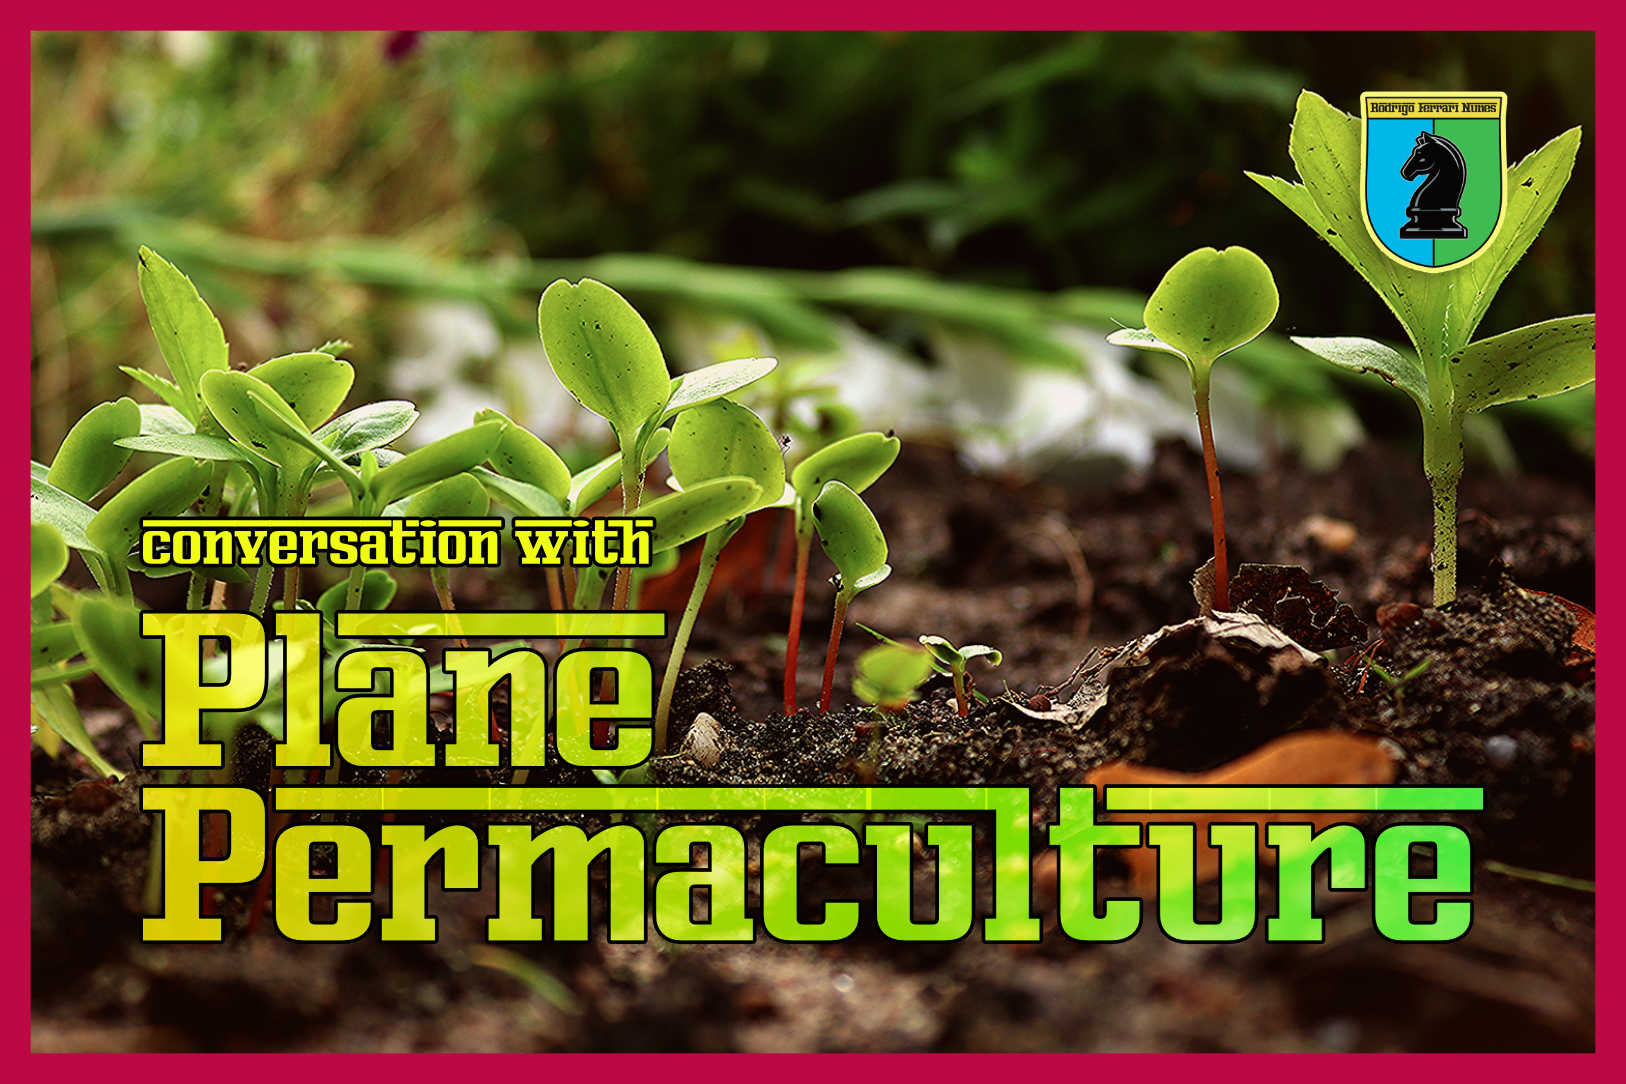 CONVERSATION WITH PLANE PERMACULTURE